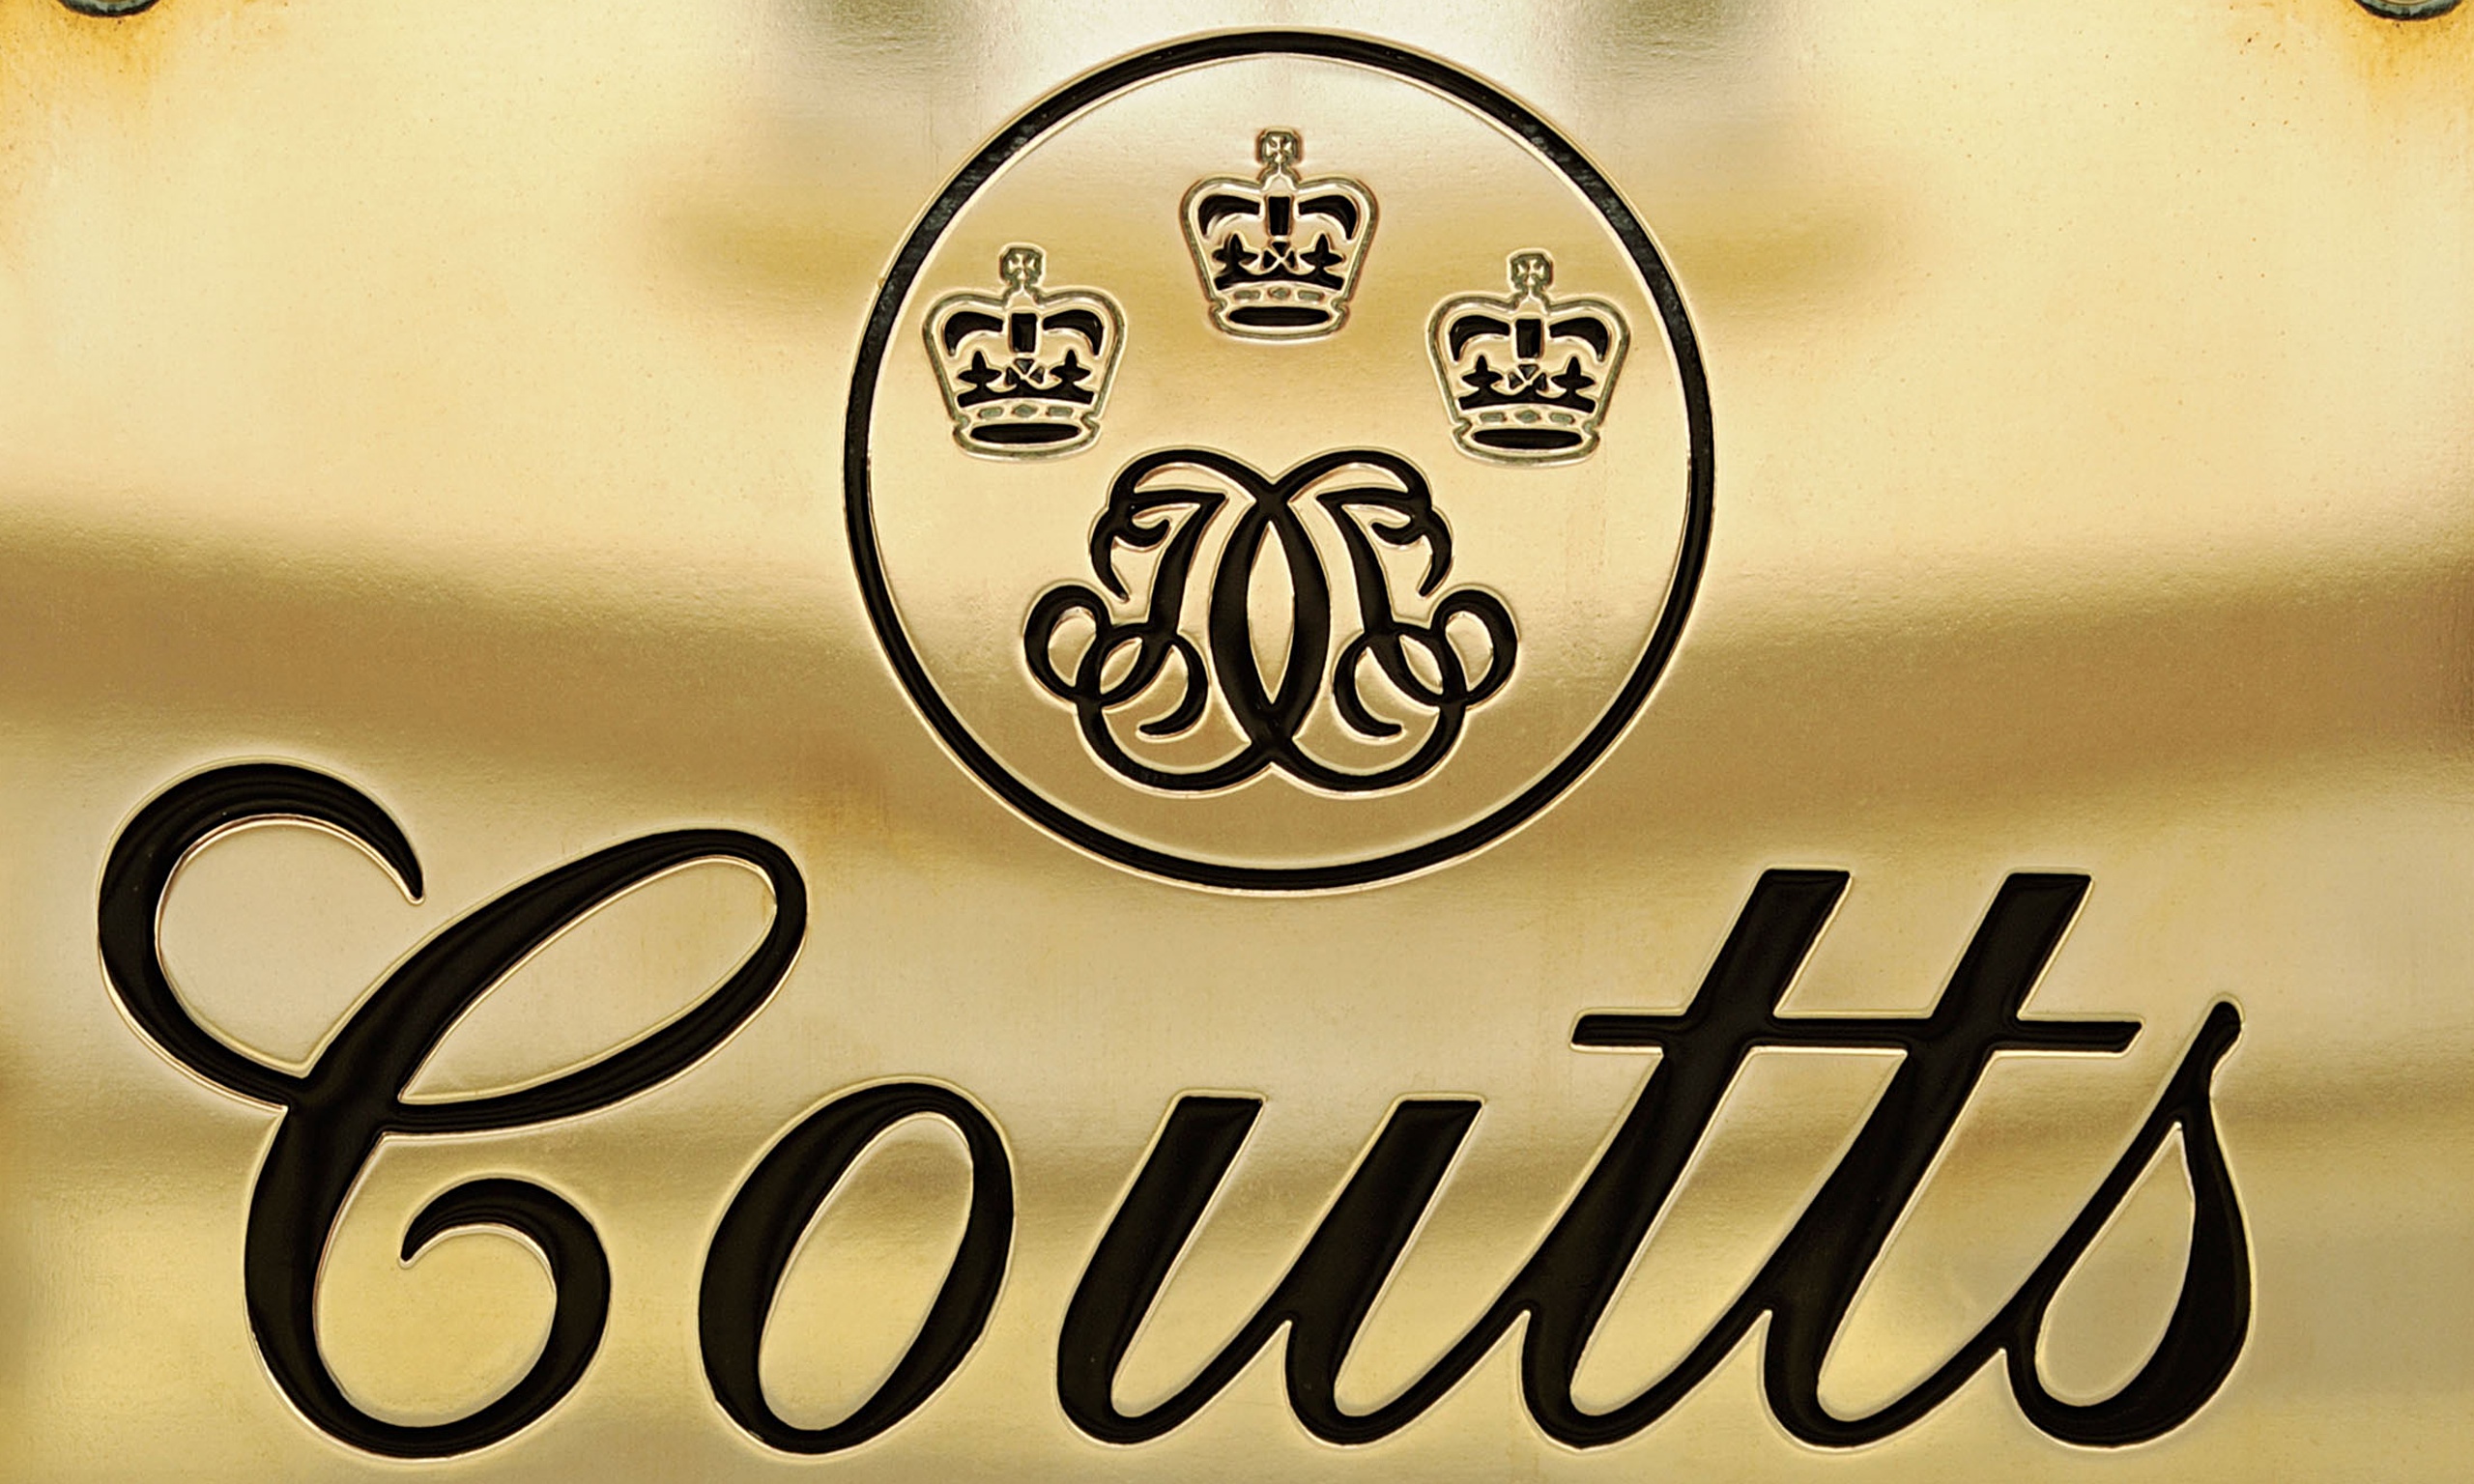 Coutts may have to pay compensation for giving unsuitable investment ...